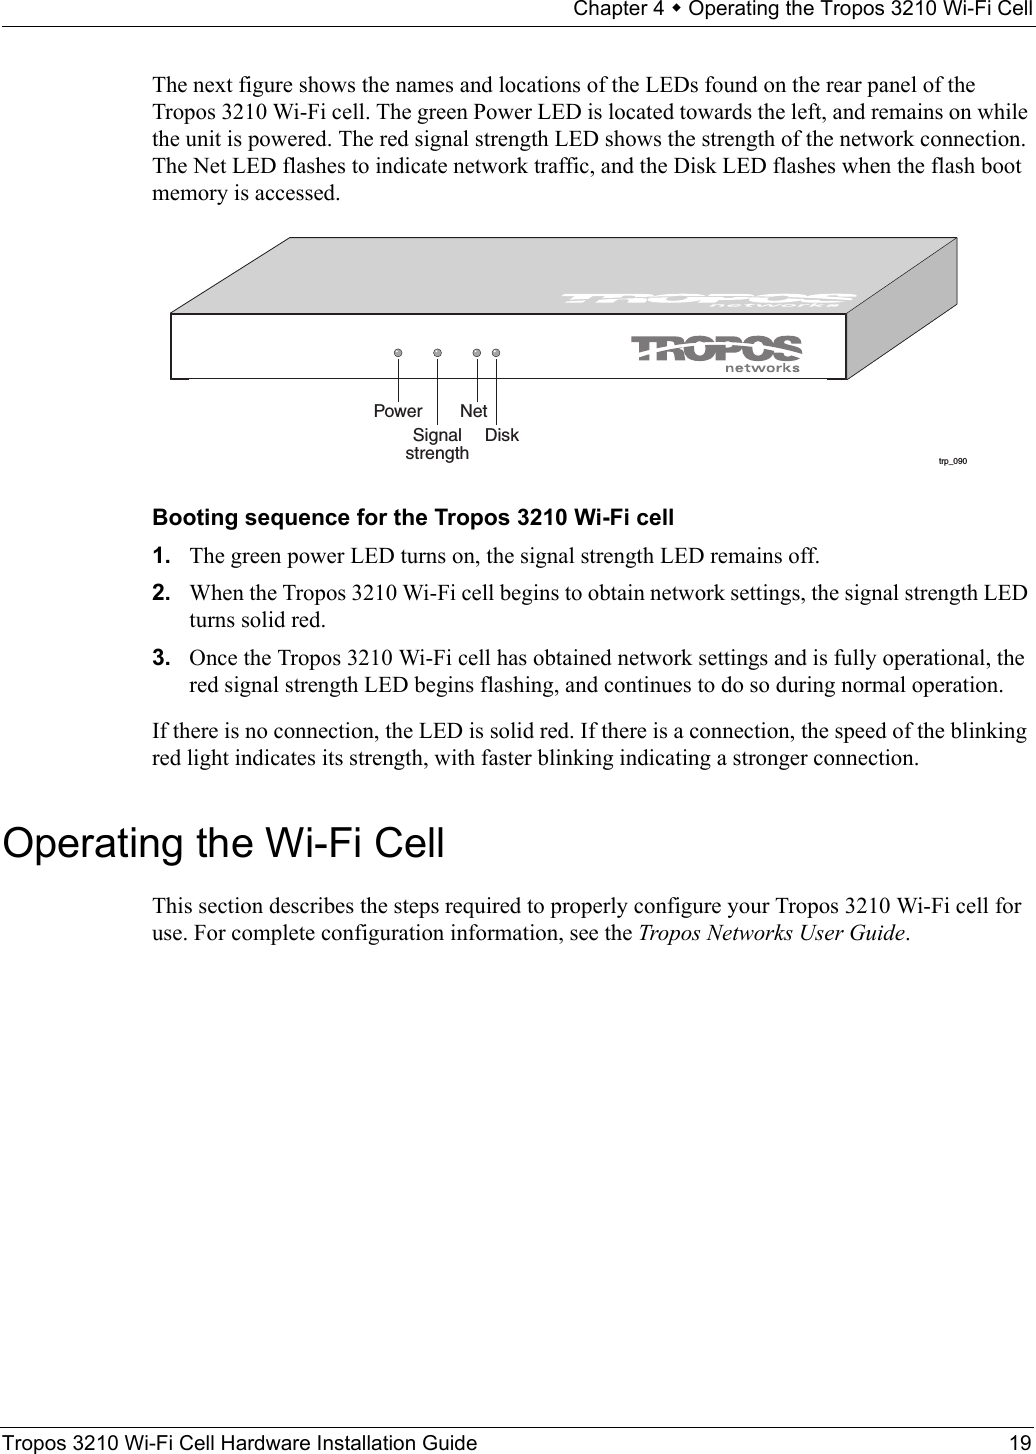 Chapter 4  Operating the Tropos 3210 Wi-Fi CellTropos 3210 Wi-Fi Cell Hardware Installation Guide 19The next figure shows the names and locations of the LEDs found on the rear panel of the Tropos 3210 Wi-Fi cell. The green Power LED is located towards the left, and remains on while the unit is powered. The red signal strength LED shows the strength of the network connection. The Net LED flashes to indicate network traffic, and the Disk LED flashes when the flash boot memory is accessed.Booting sequence for the Tropos 3210 Wi-Fi cell 1. The green power LED turns on, the signal strength LED remains off.2. When the Tropos 3210 Wi-Fi cell begins to obtain network settings, the signal strength LED turns solid red.3. Once the Tropos 3210 Wi-Fi cell has obtained network settings and is fully operational, the red signal strength LED begins flashing, and continues to do so during normal operation.If there is no connection, the LED is solid red. If there is a connection, the speed of the blinking red light indicates its strength, with faster blinking indicating a stronger connection.Operating the Wi-Fi CellThis section describes the steps required to properly configure your Tropos 3210 Wi-Fi cell for use. For complete configuration information, see the Tropos Networks User Guide.trp_090Power NetSignalstrengthDisk